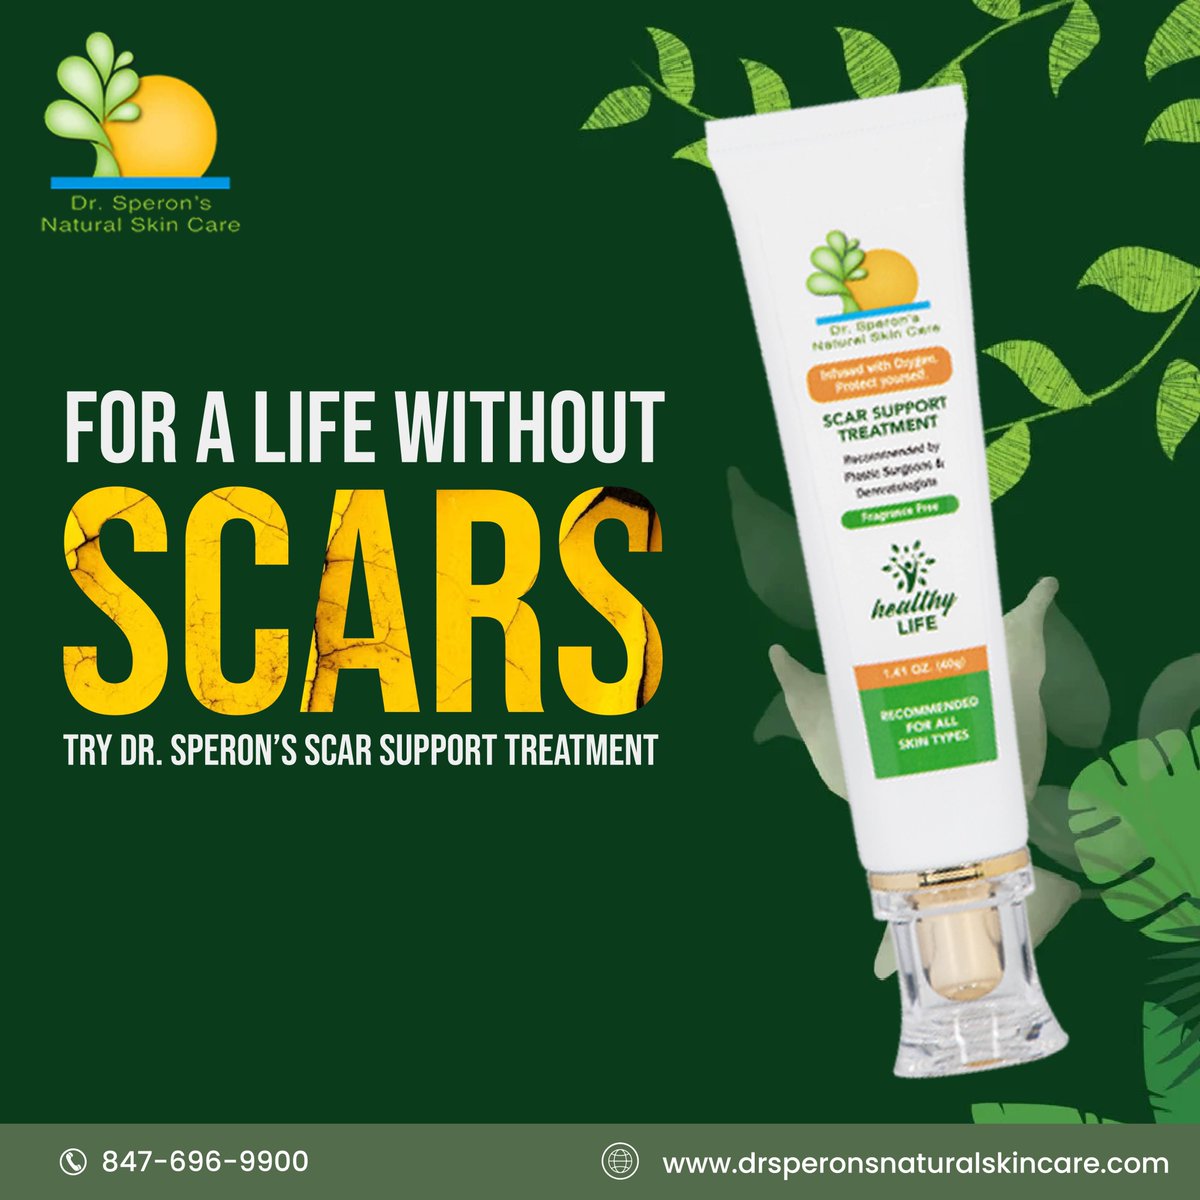 Get Scar-less Appearance
Shop Now
bit.ly/3J4cVNw

#spotlessface #facialskincare #FlawlessSkin #SkinRadiance #scars #scartreatment #scartherapy #FacialTreatment #scarremoval #acnescars #scarcream #ScarTreatment #skincare #blemishfree #AcneScarTreatment #SkinExperts